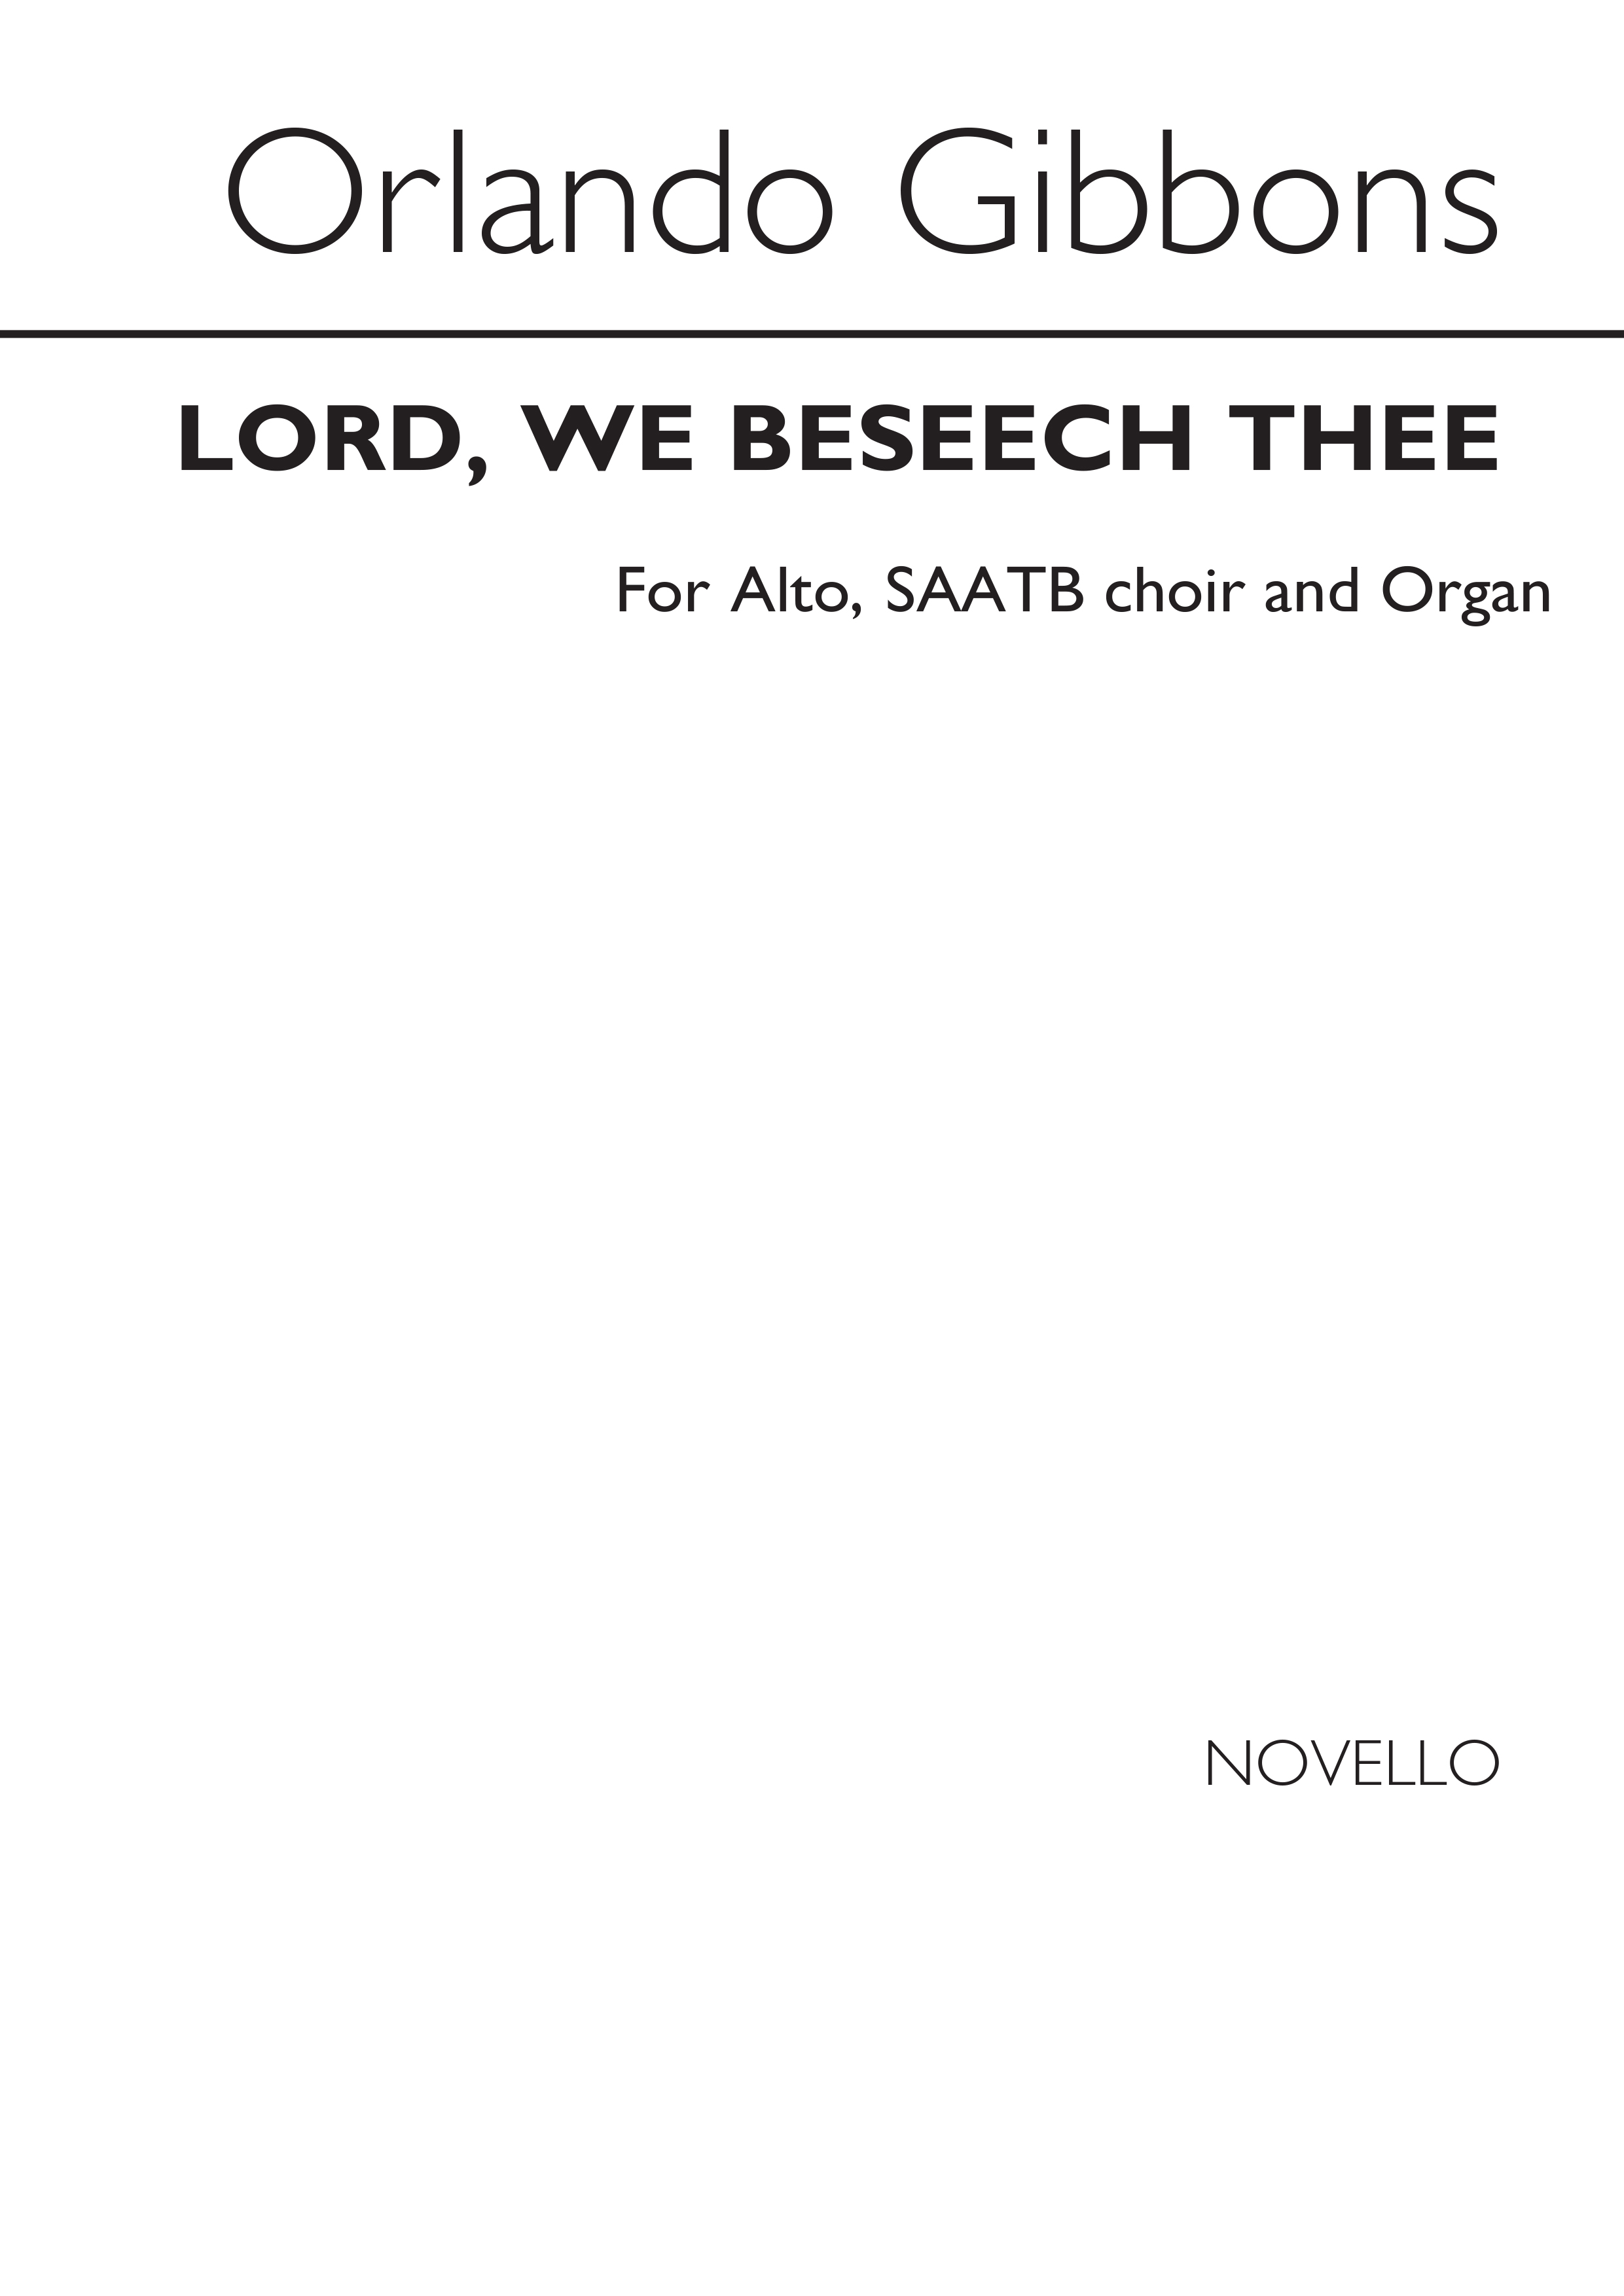 Orlando Gibbons: Lord, We Beseech Thee